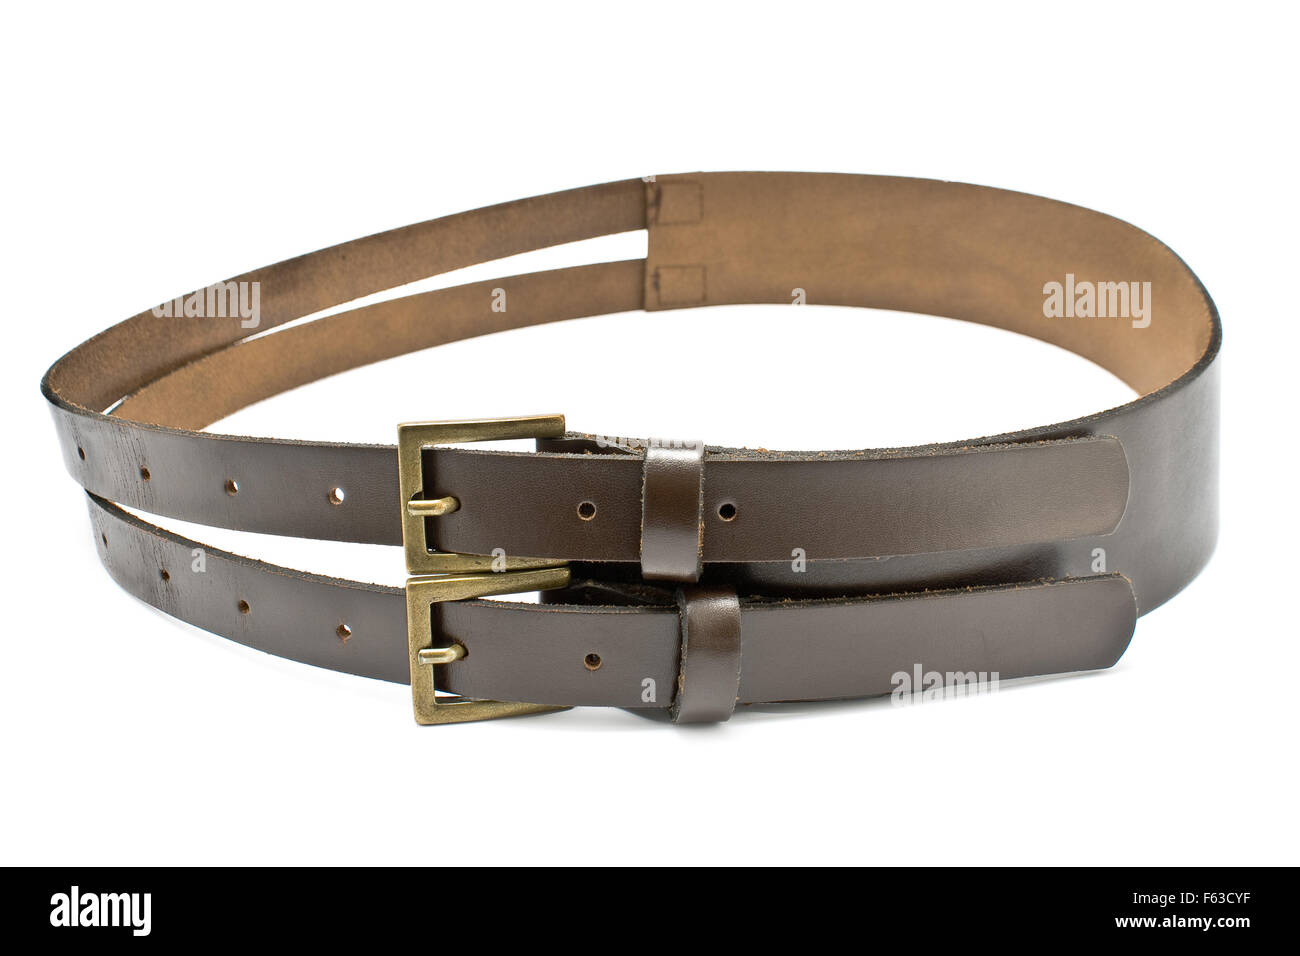 Ceinture en cuir isolated on white Banque D'Images